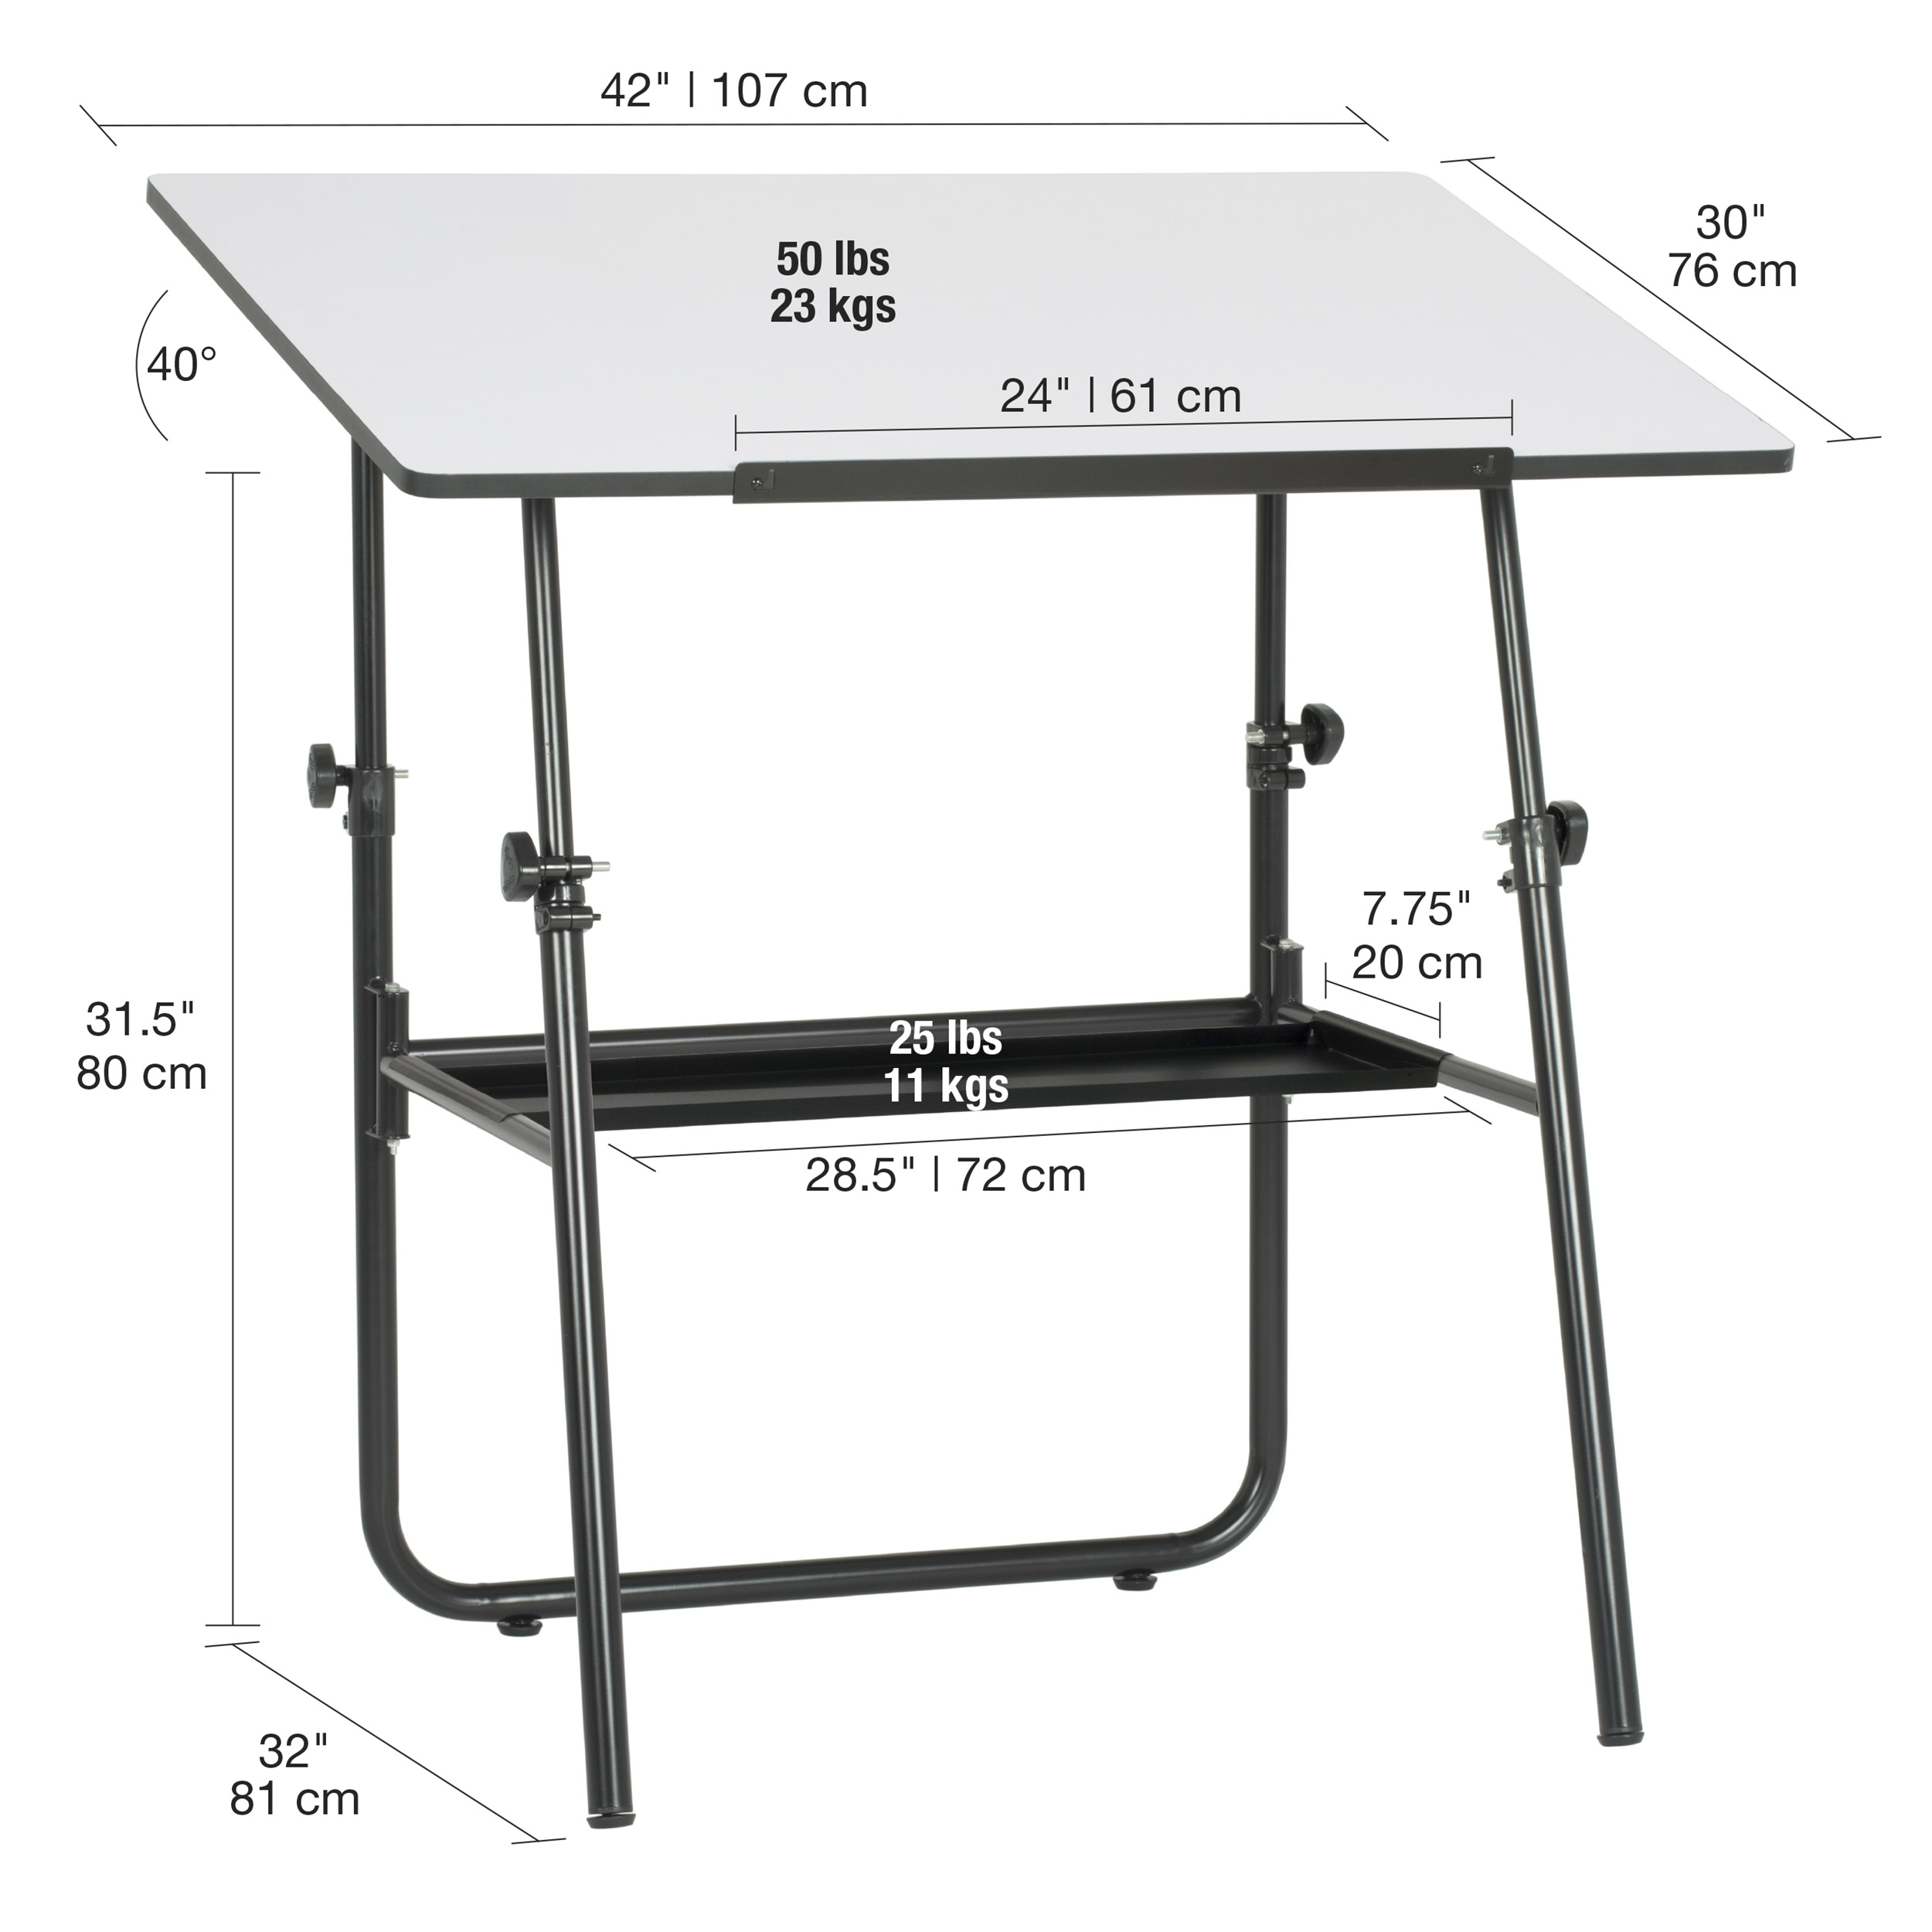 Studio Designs Ultima Drafting Table with Adjustable Fold-A-Way Base and 42"x 30" Top - image 5 of 14